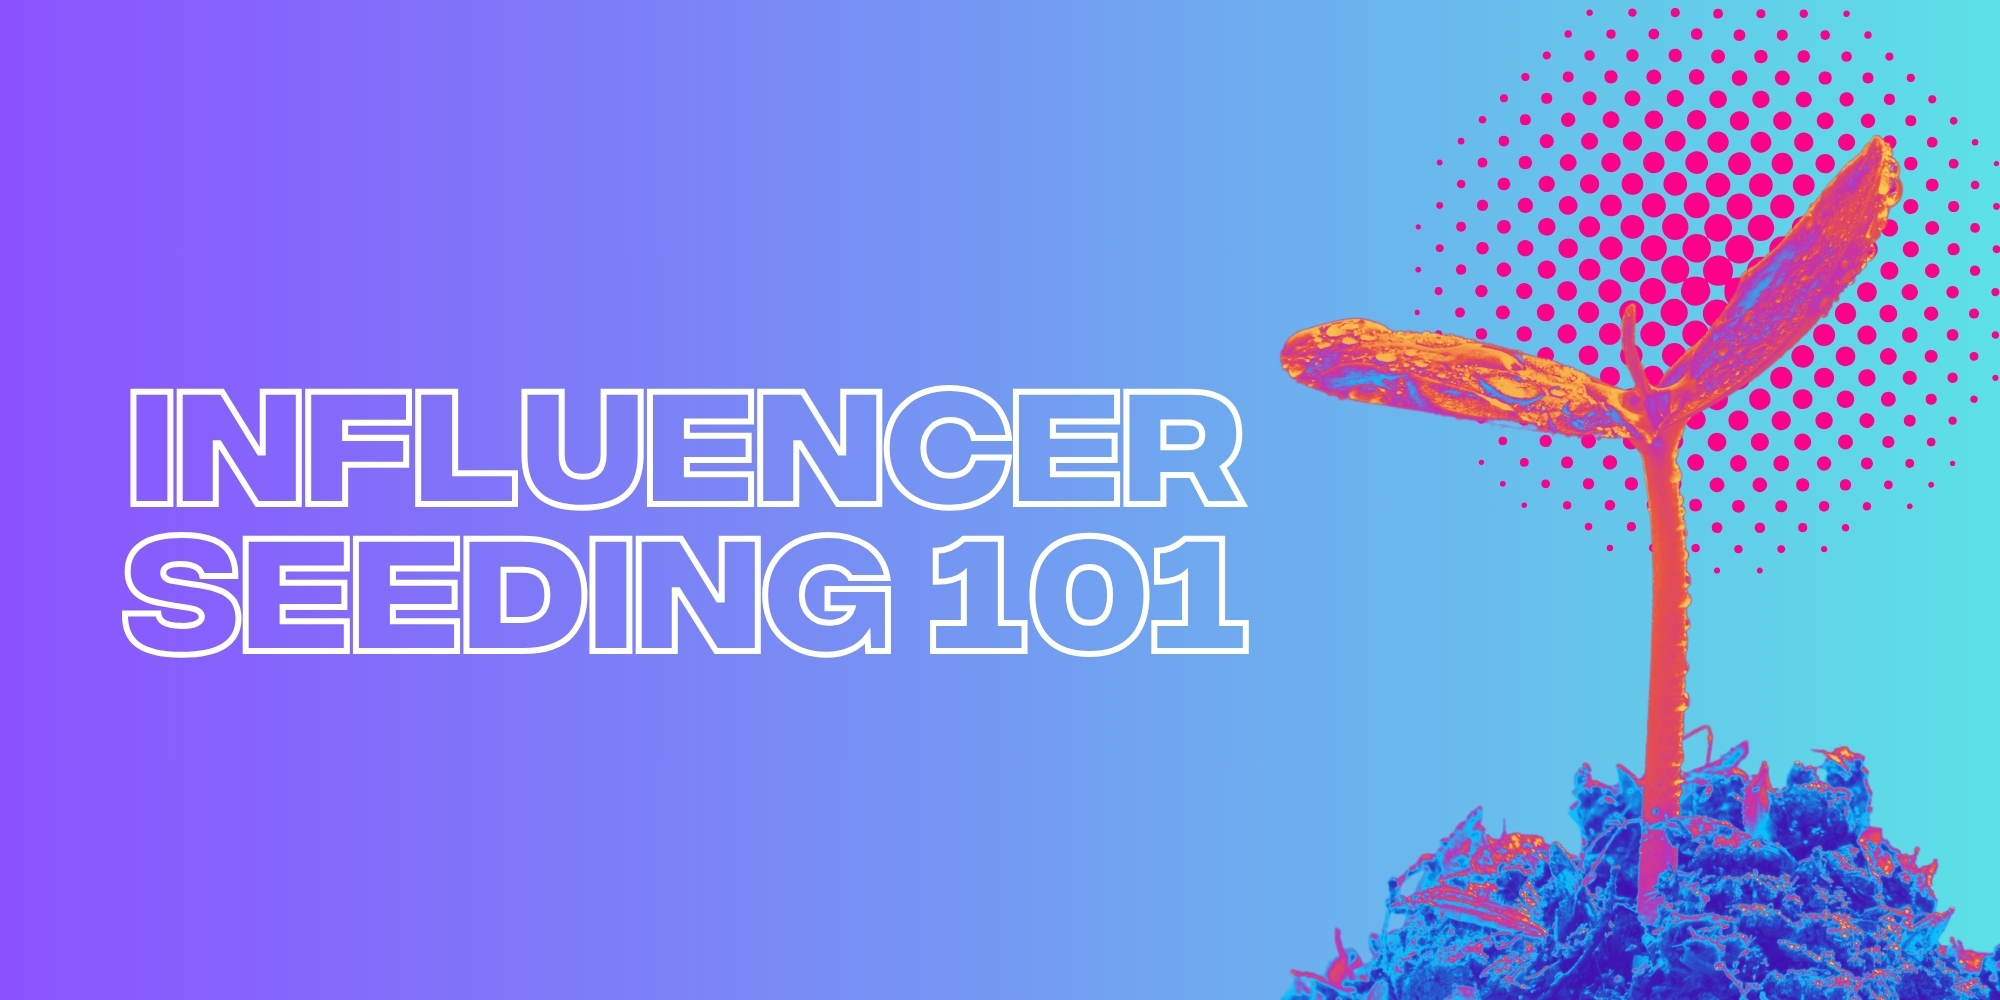 What Is Influencer Seeding And Why Do You Need It?